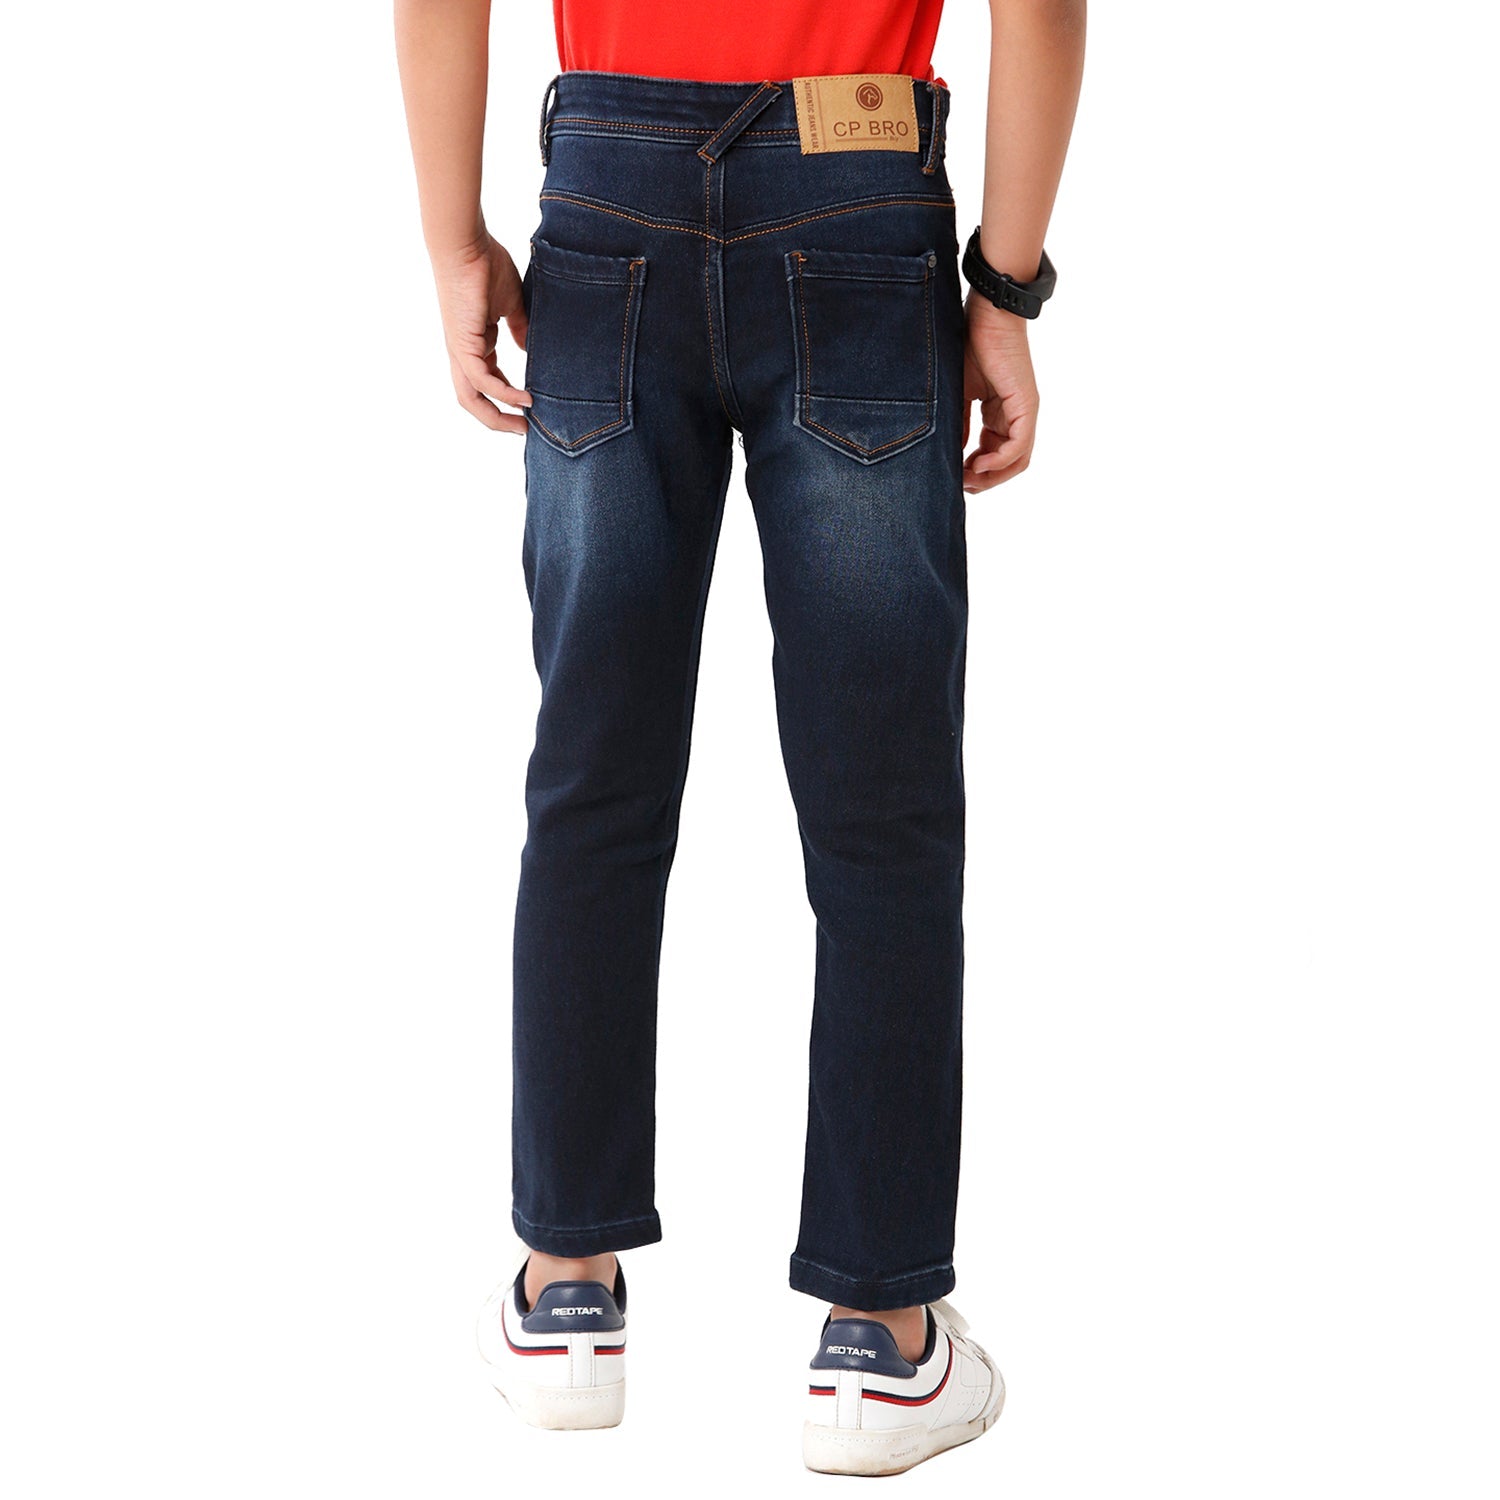 Classic Polo Bro Boys Cotton Solid Slim Fit Navy Blue Color Denim Jeans - BBD S1 02C Jeans Classic Polo 